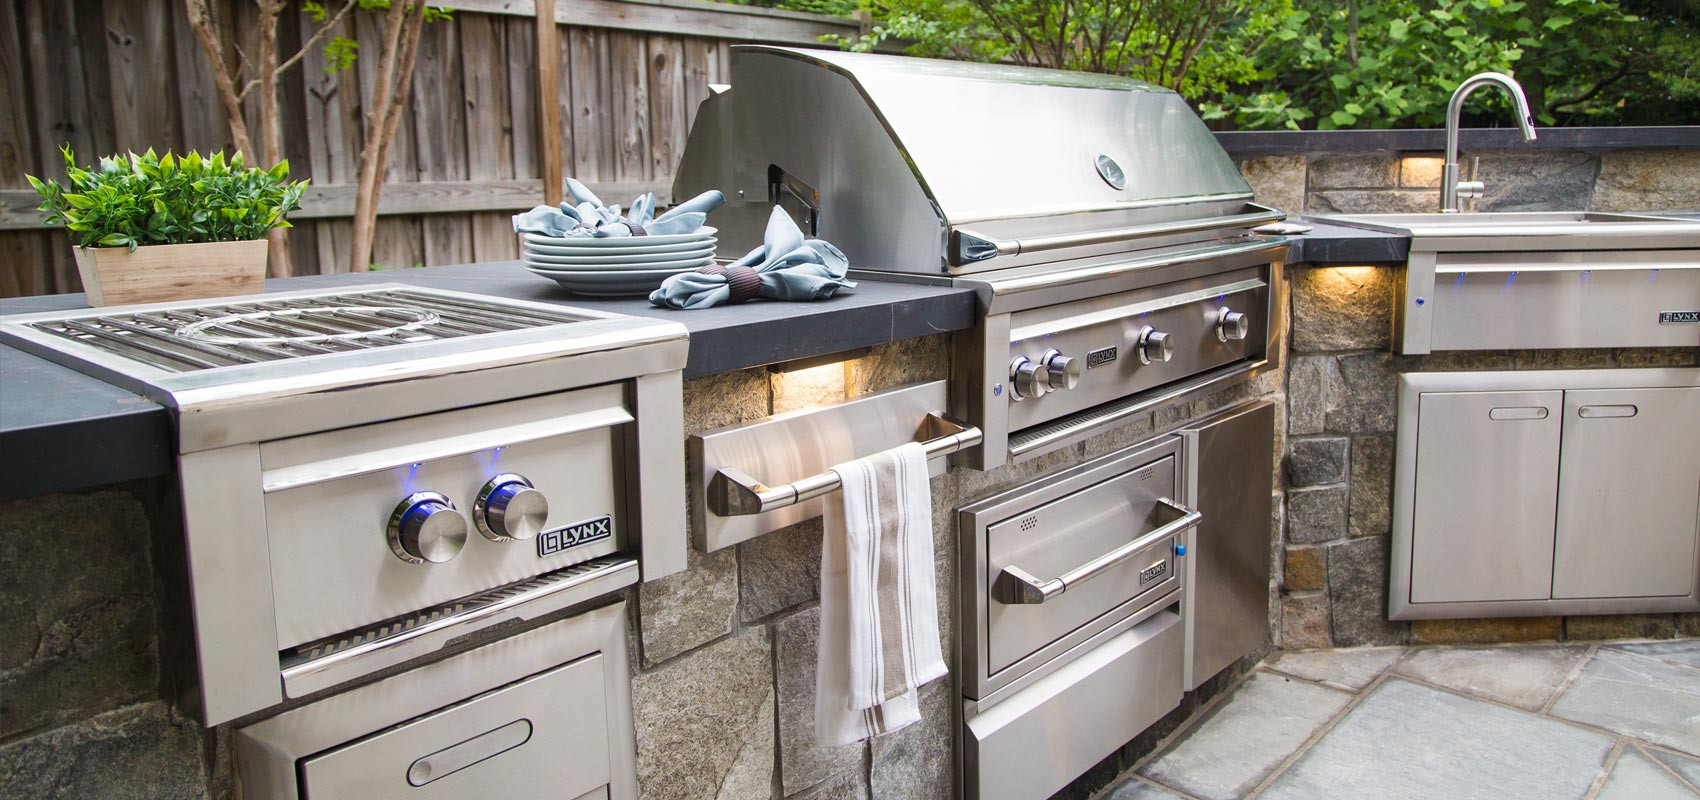 Affordable Outdoor Kitchens
 Affordable Outdoor Kitchens